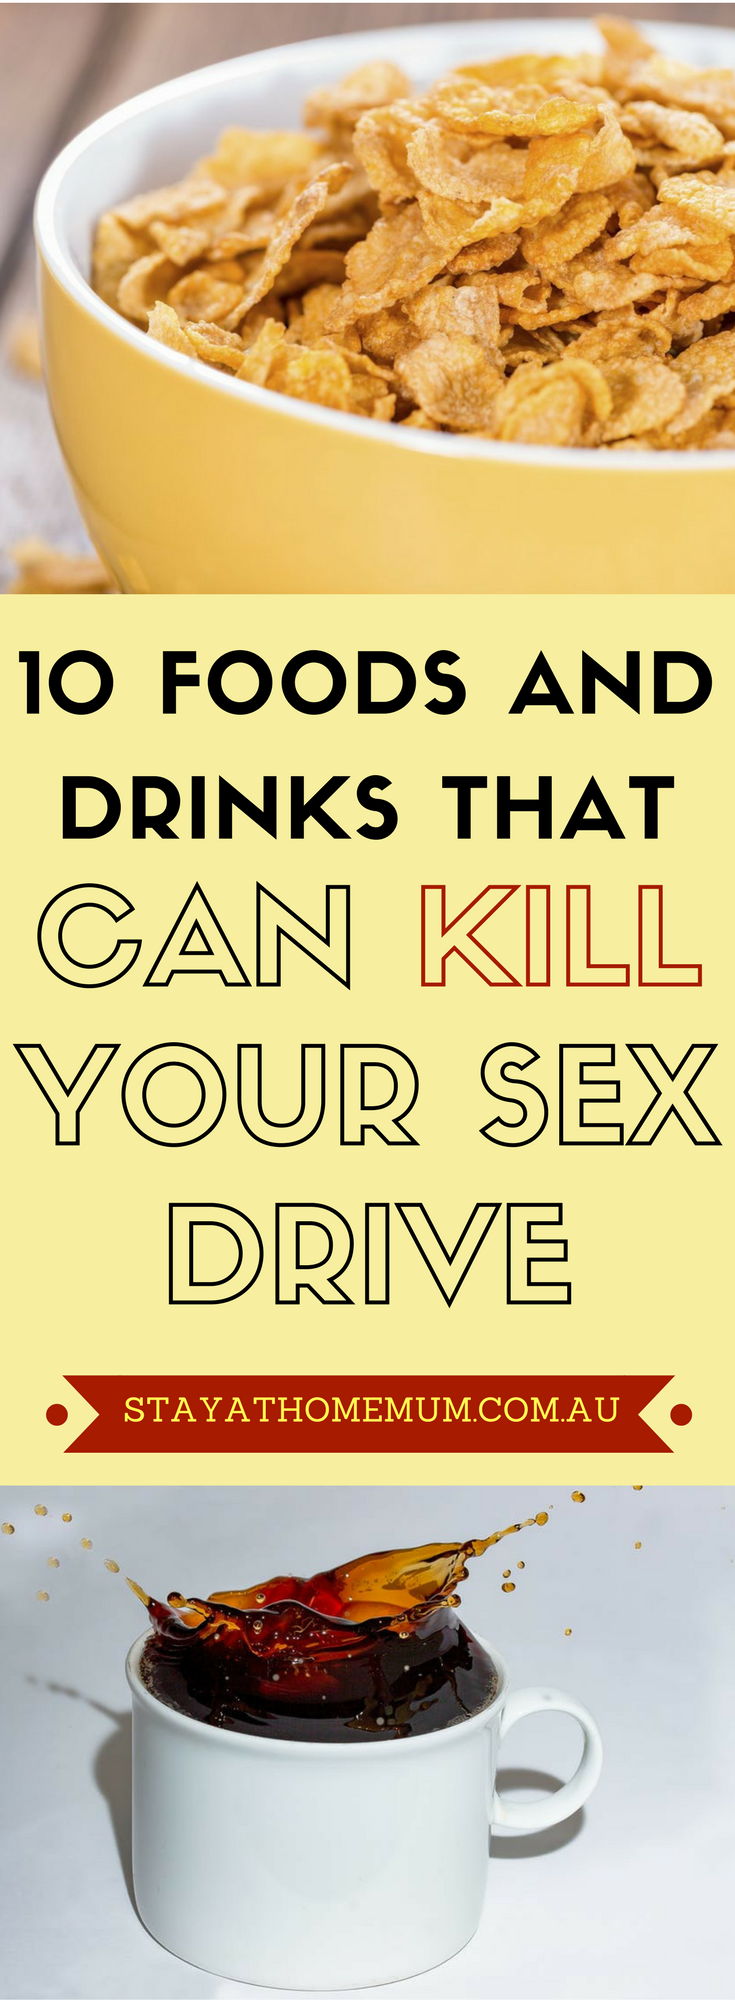 10 Foods And Drinks That Can Kill Your Sex Drive